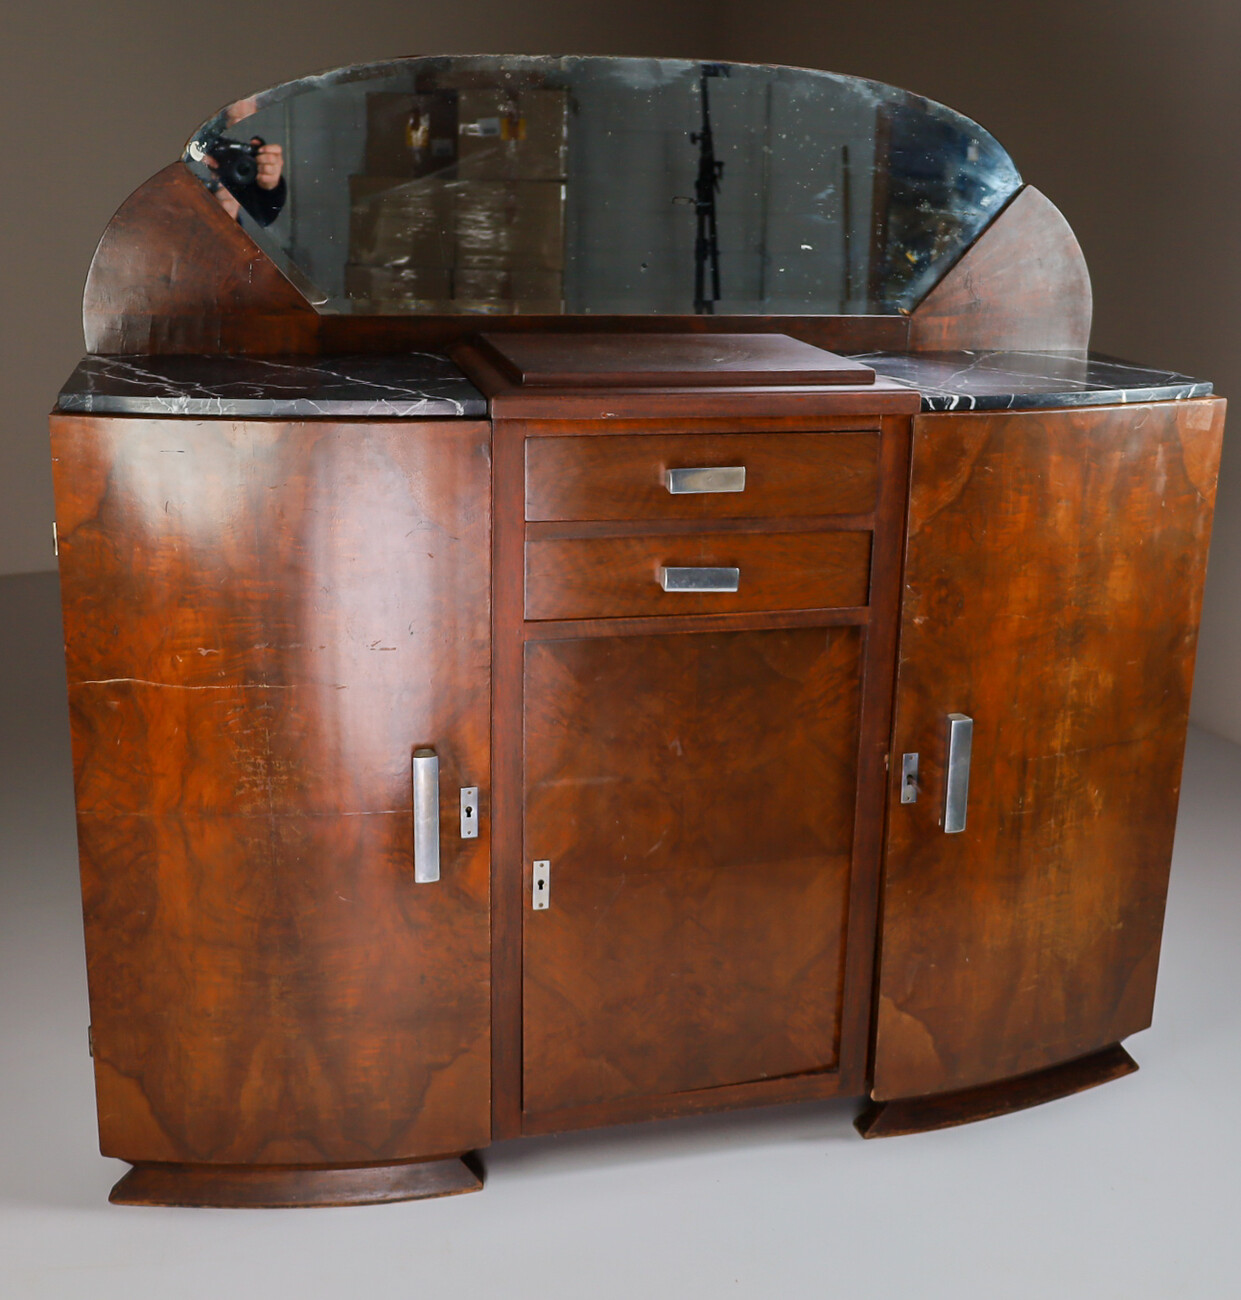 Weven Omgaan met Augment Art-Deco dressoir in Walnut Vienna 1930s ( need some restoration !!) 20th  century - Art deco - Items by category - European ANTIQUES & DECORATIVE